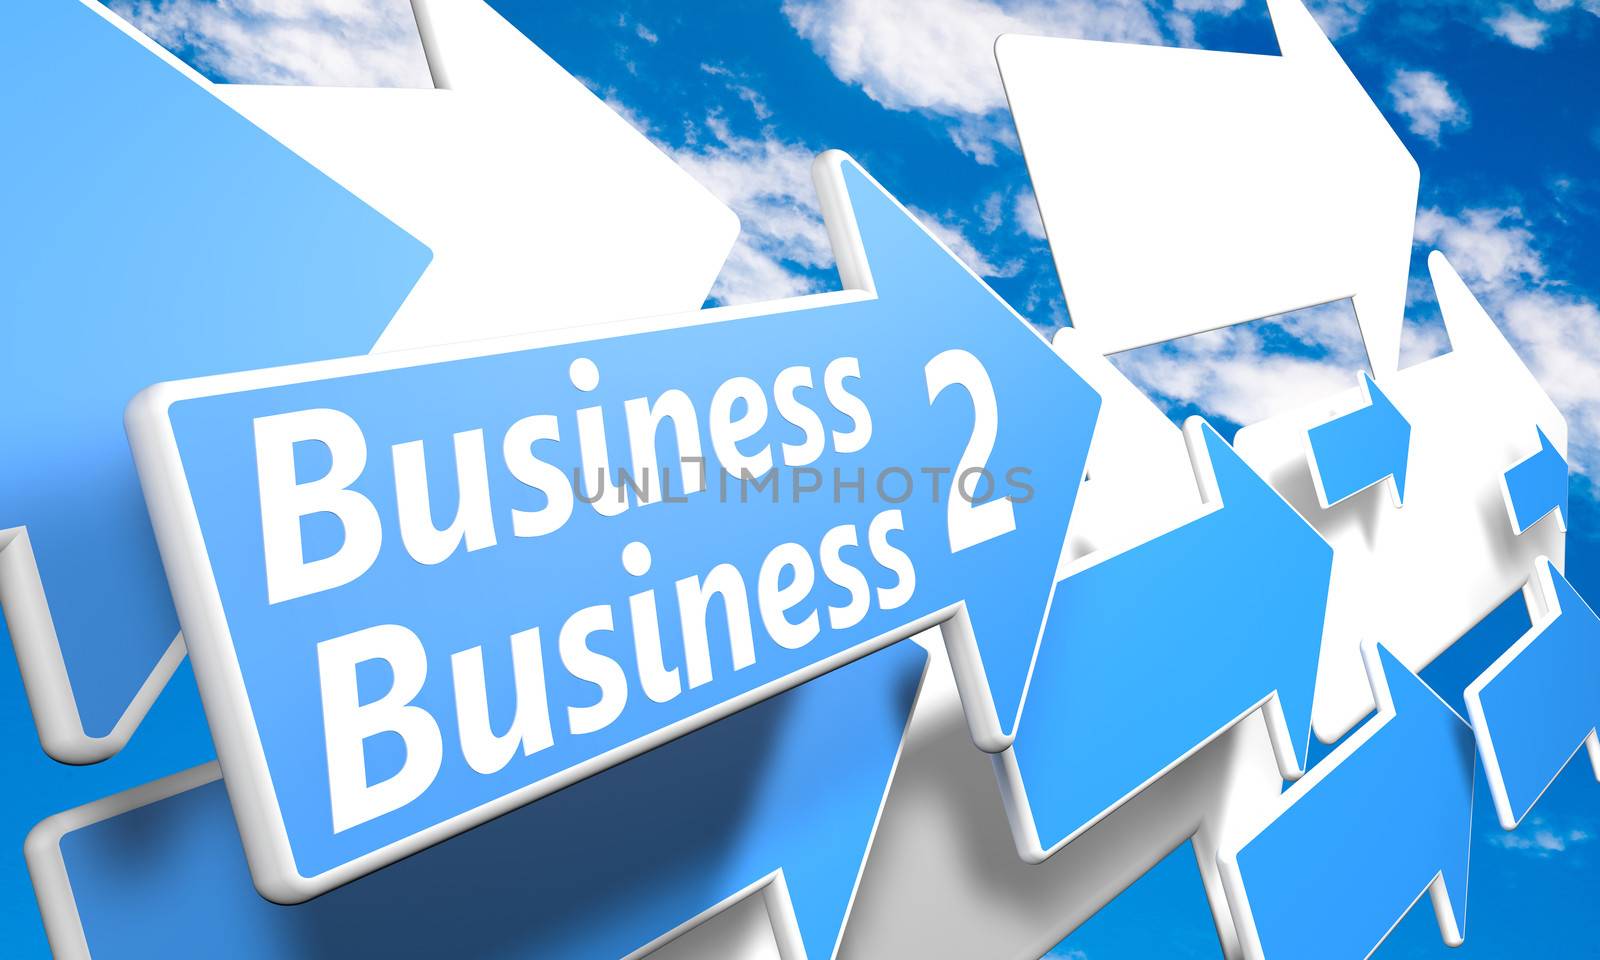 Business 2 Business 3d render concept with blue and white arrows flying in a blue sky with clouds